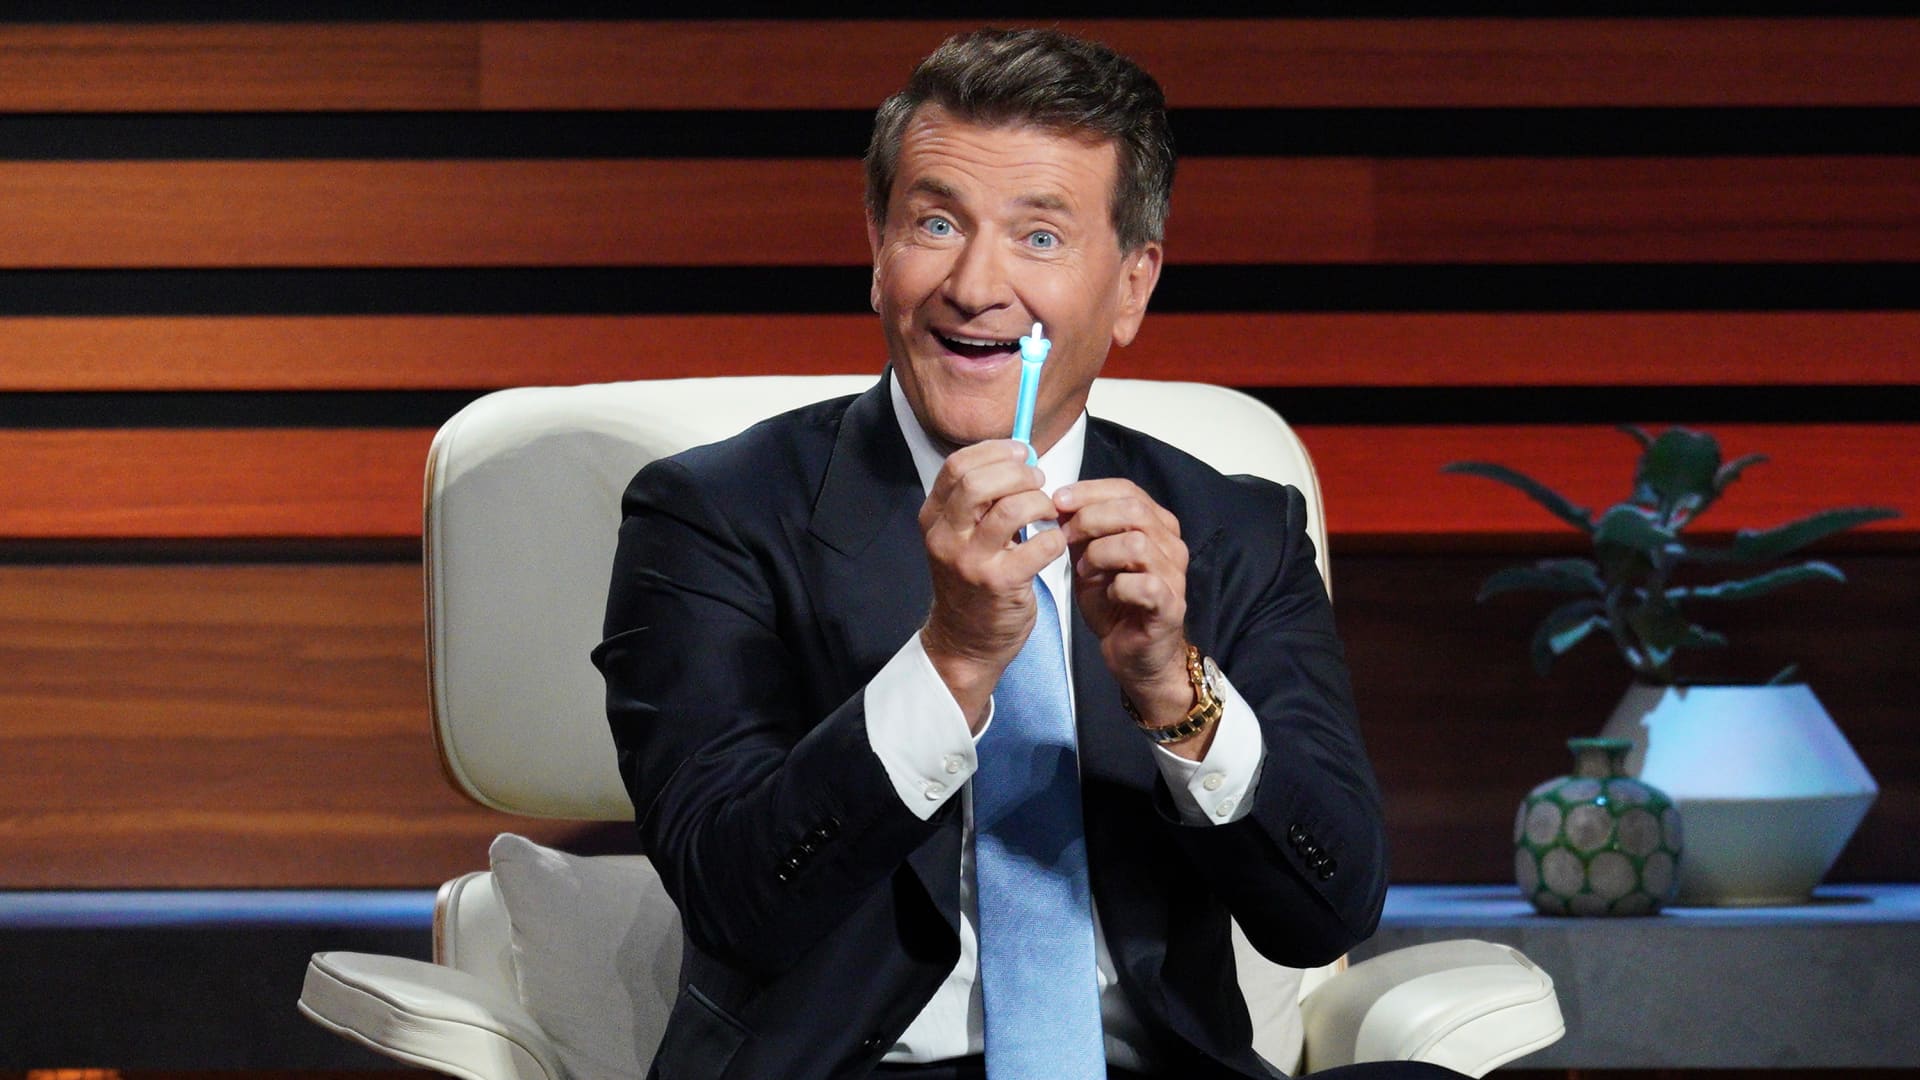 Robert Herjavec tests out Oogiebear's product, which has a loop on one end and a scoop on the other.